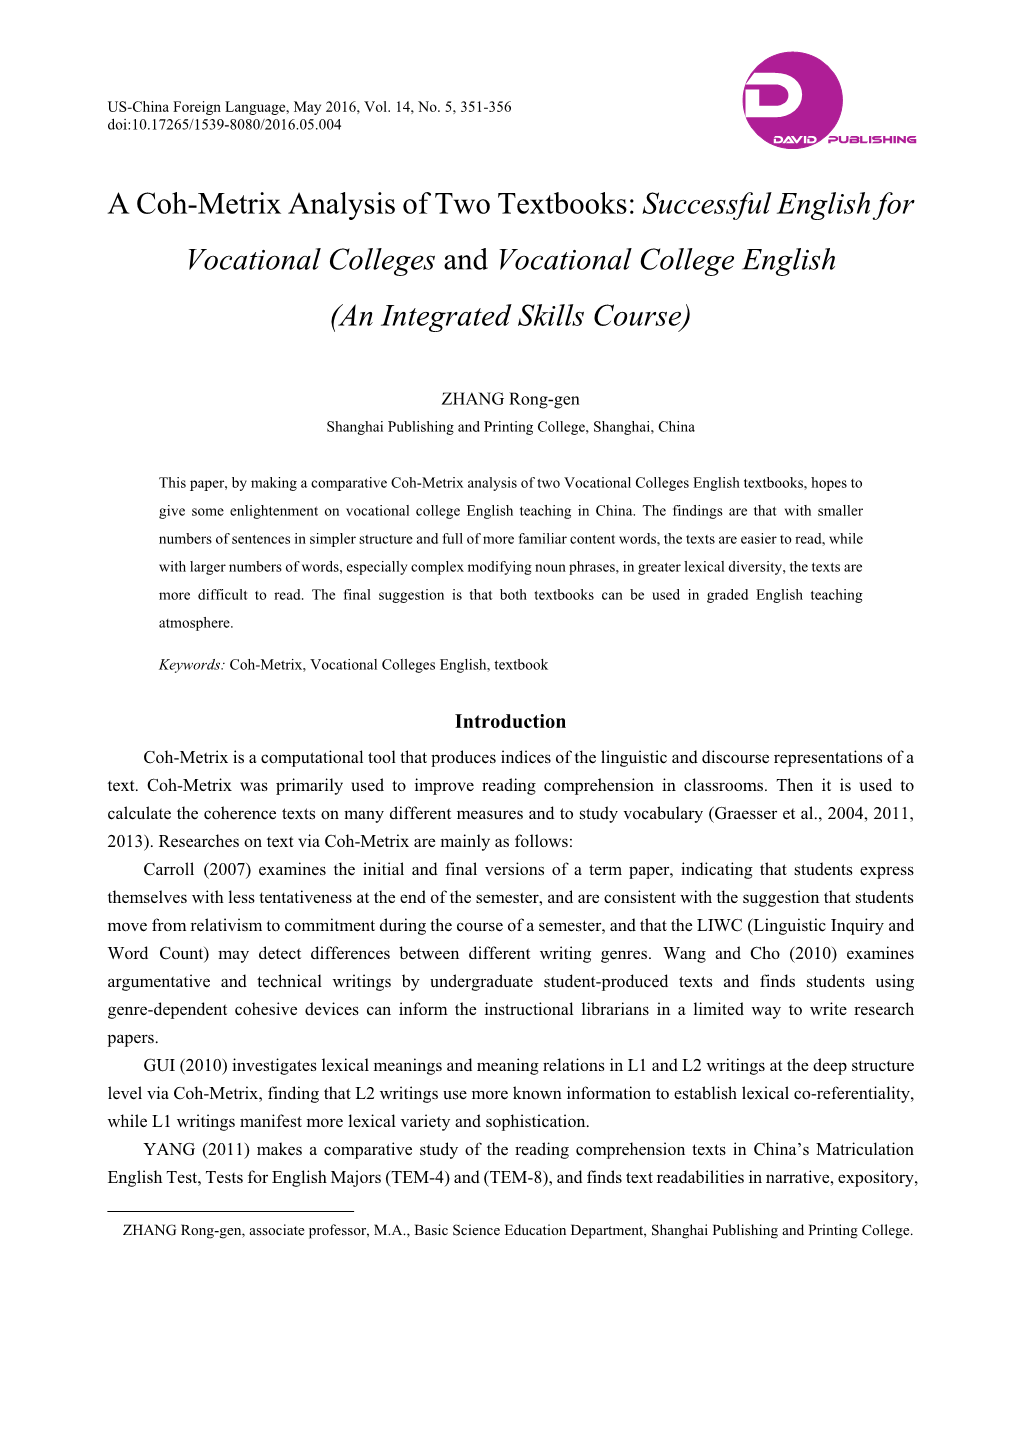 A Coh-Metrix Analysis of Two Textbooks: Successful English for Vocational Colleges and Vocational College English (An Integrated Skills Course)